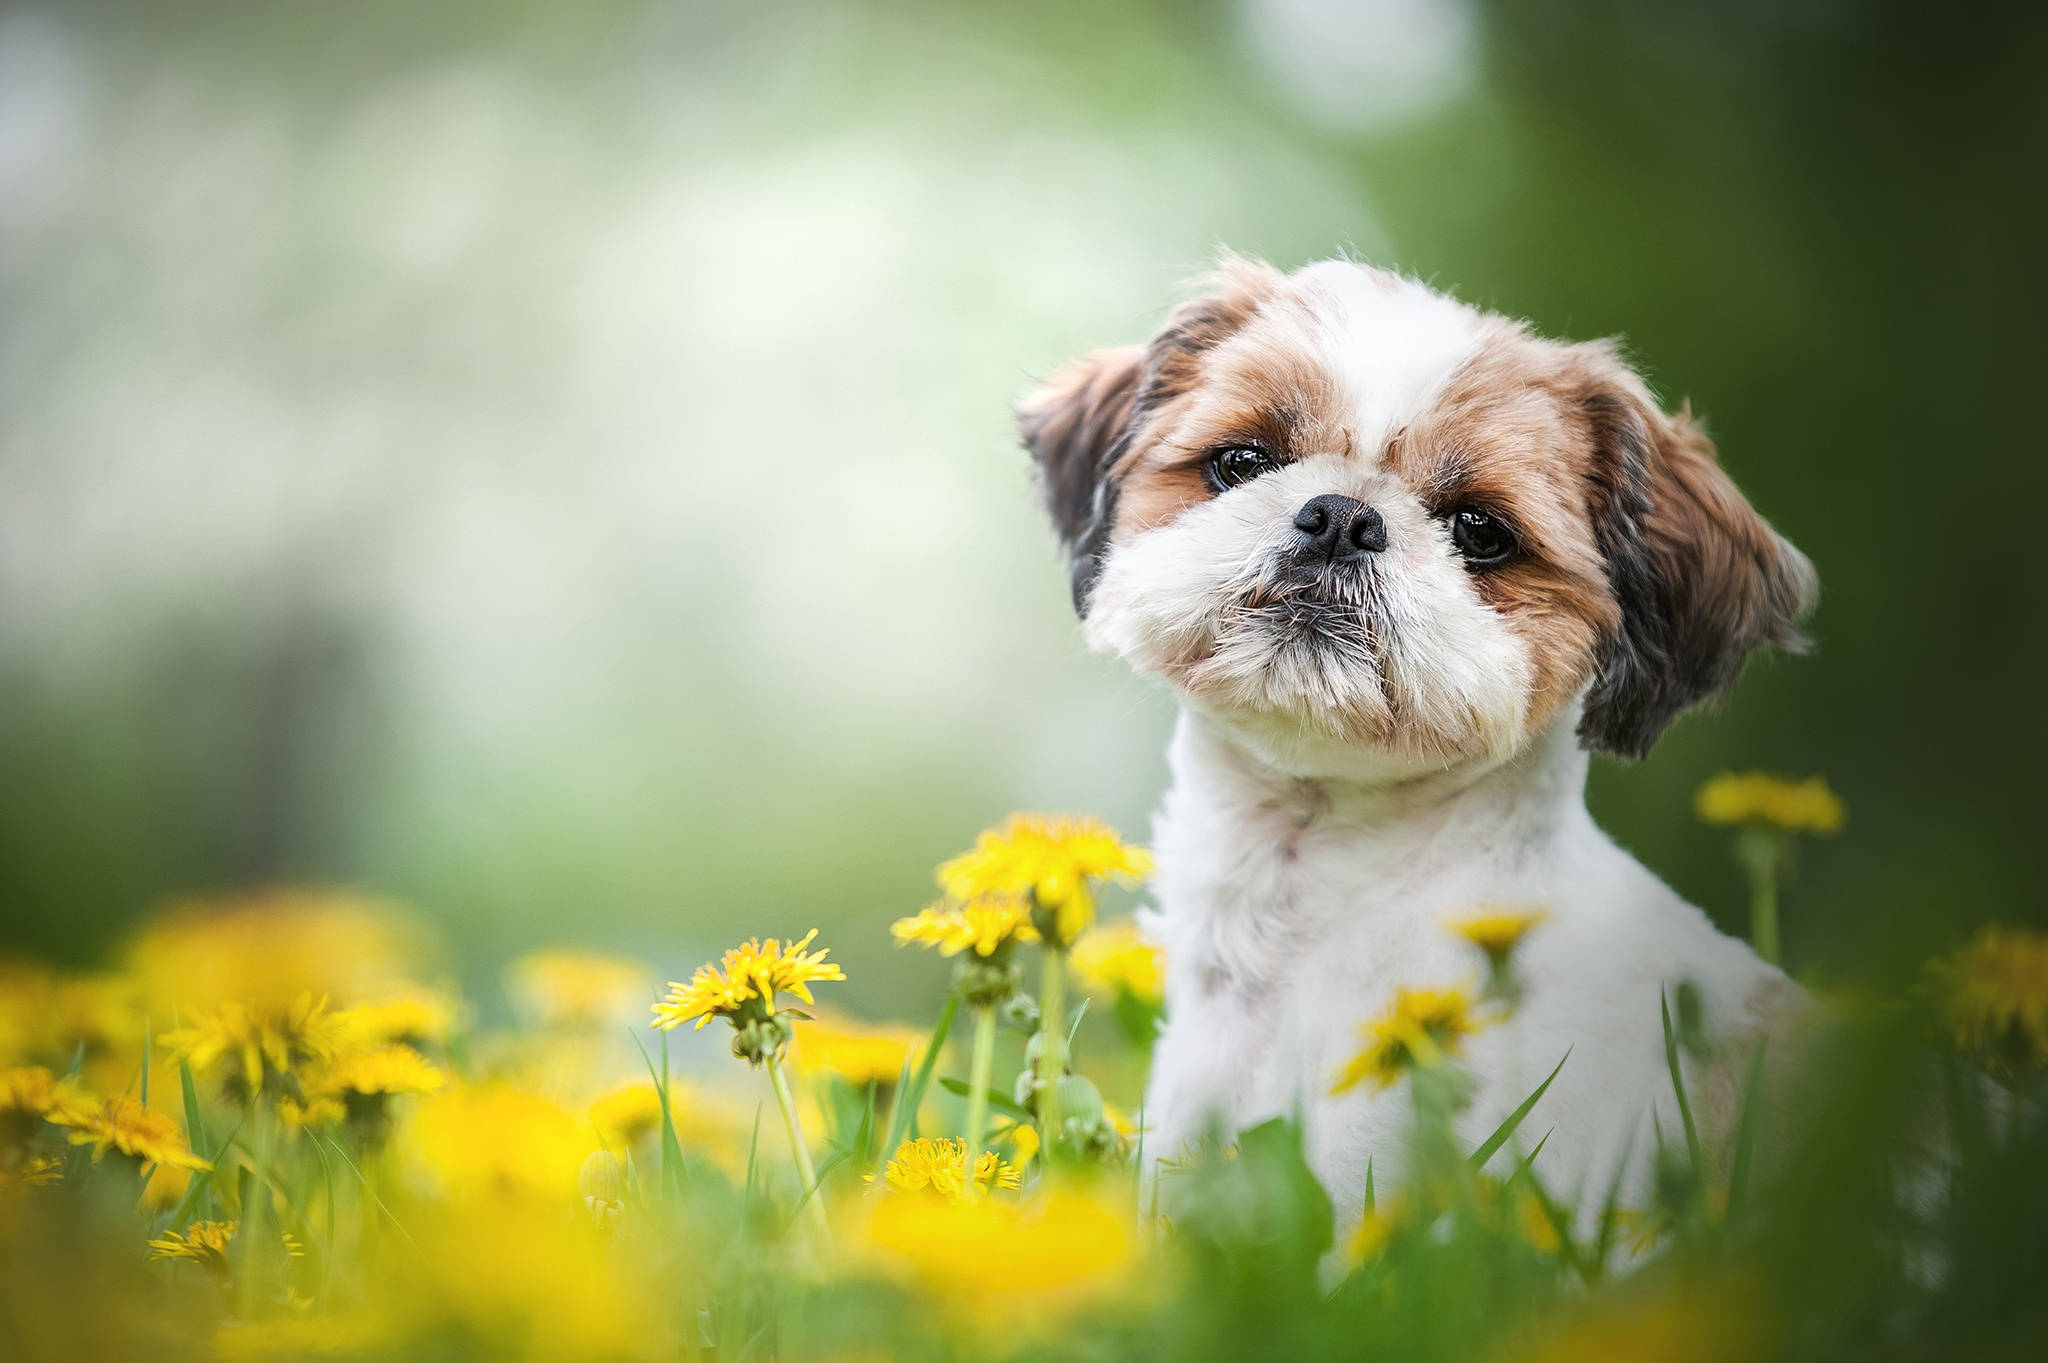 Puppy Dog With Yellow Flowers Wallpaper